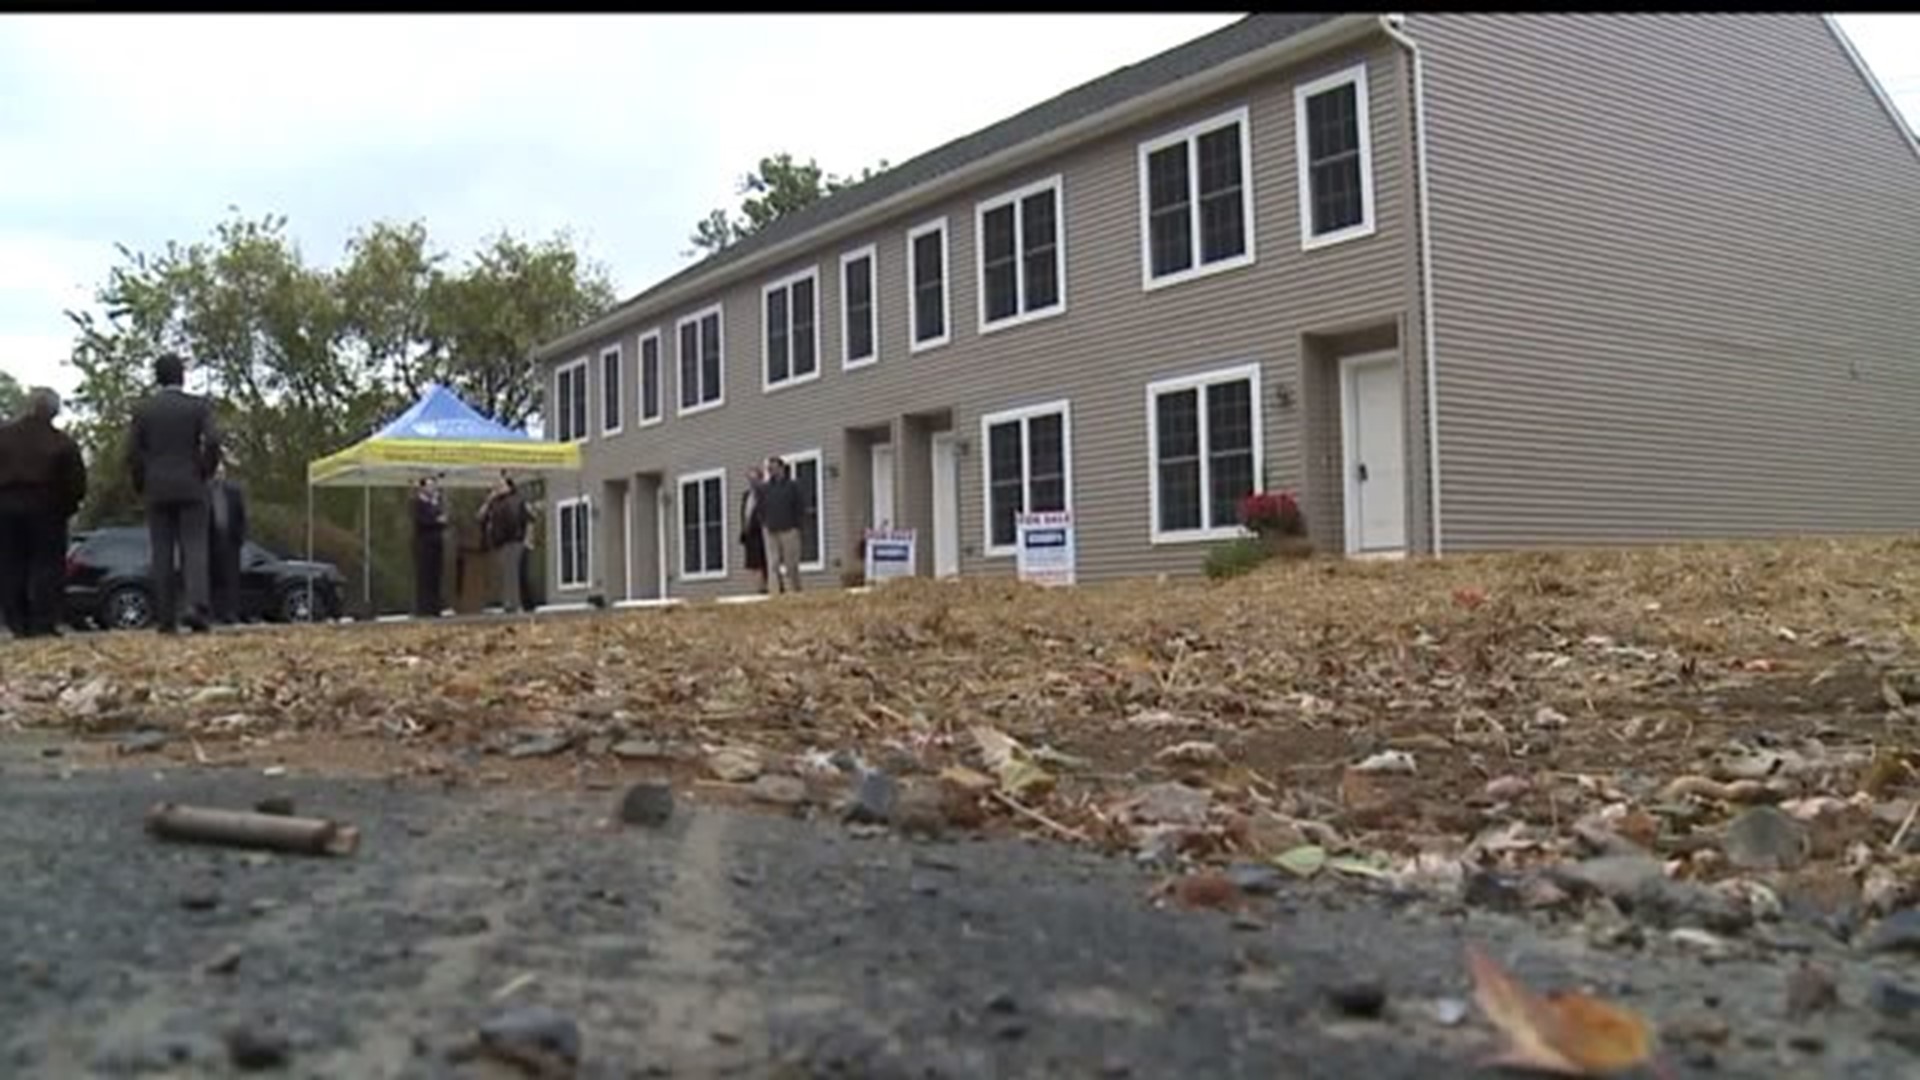 Dauphin County Commissioners turn blight into new homes